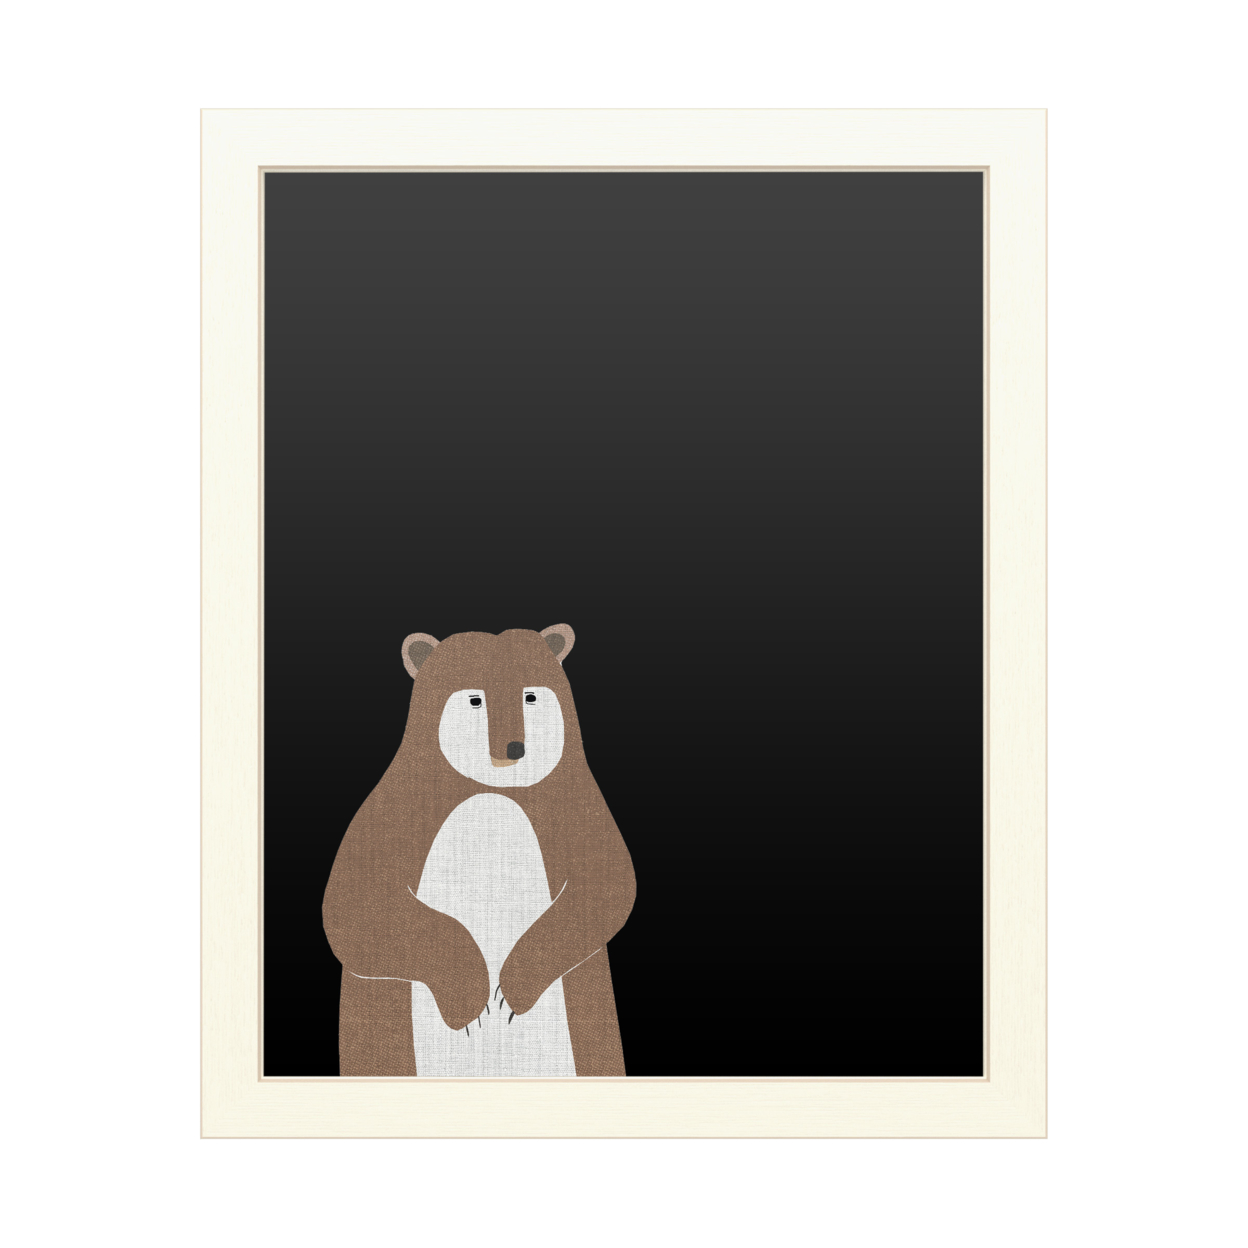 16 X 20 Chalk Board With Printed Artwork - Annie Bailey Art Brown Bear Linen White Board - Ready To Hang Chalkboard